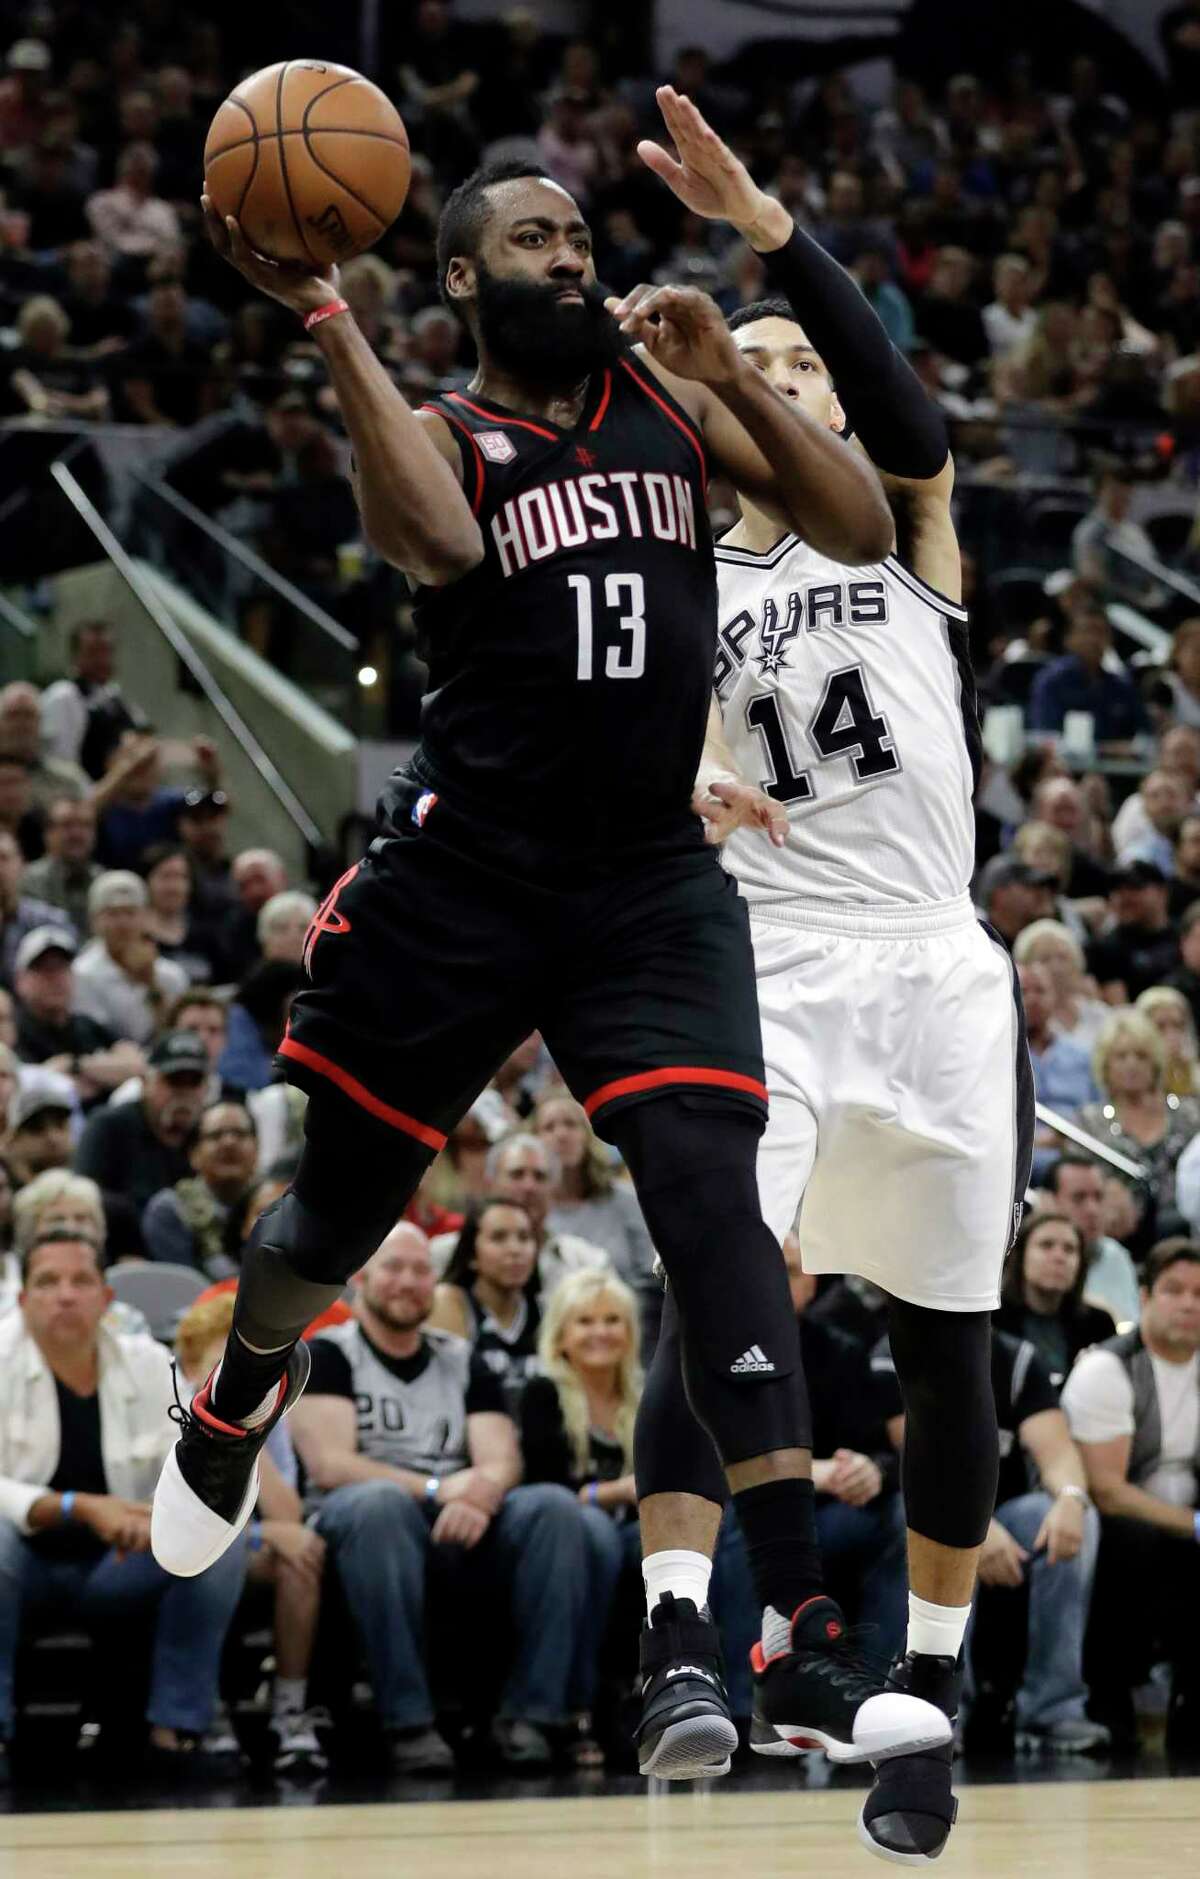 Houston Rockets guard James Harden (13) leaps to make a pass under pressure from San Antonio Spurs' Danny Green (14) during the first half of Game 2 in a second-round NBA basketball playoff series, Wednesday, May 3, 2017, in San Antonio. (AP Photo/Eric Gay)